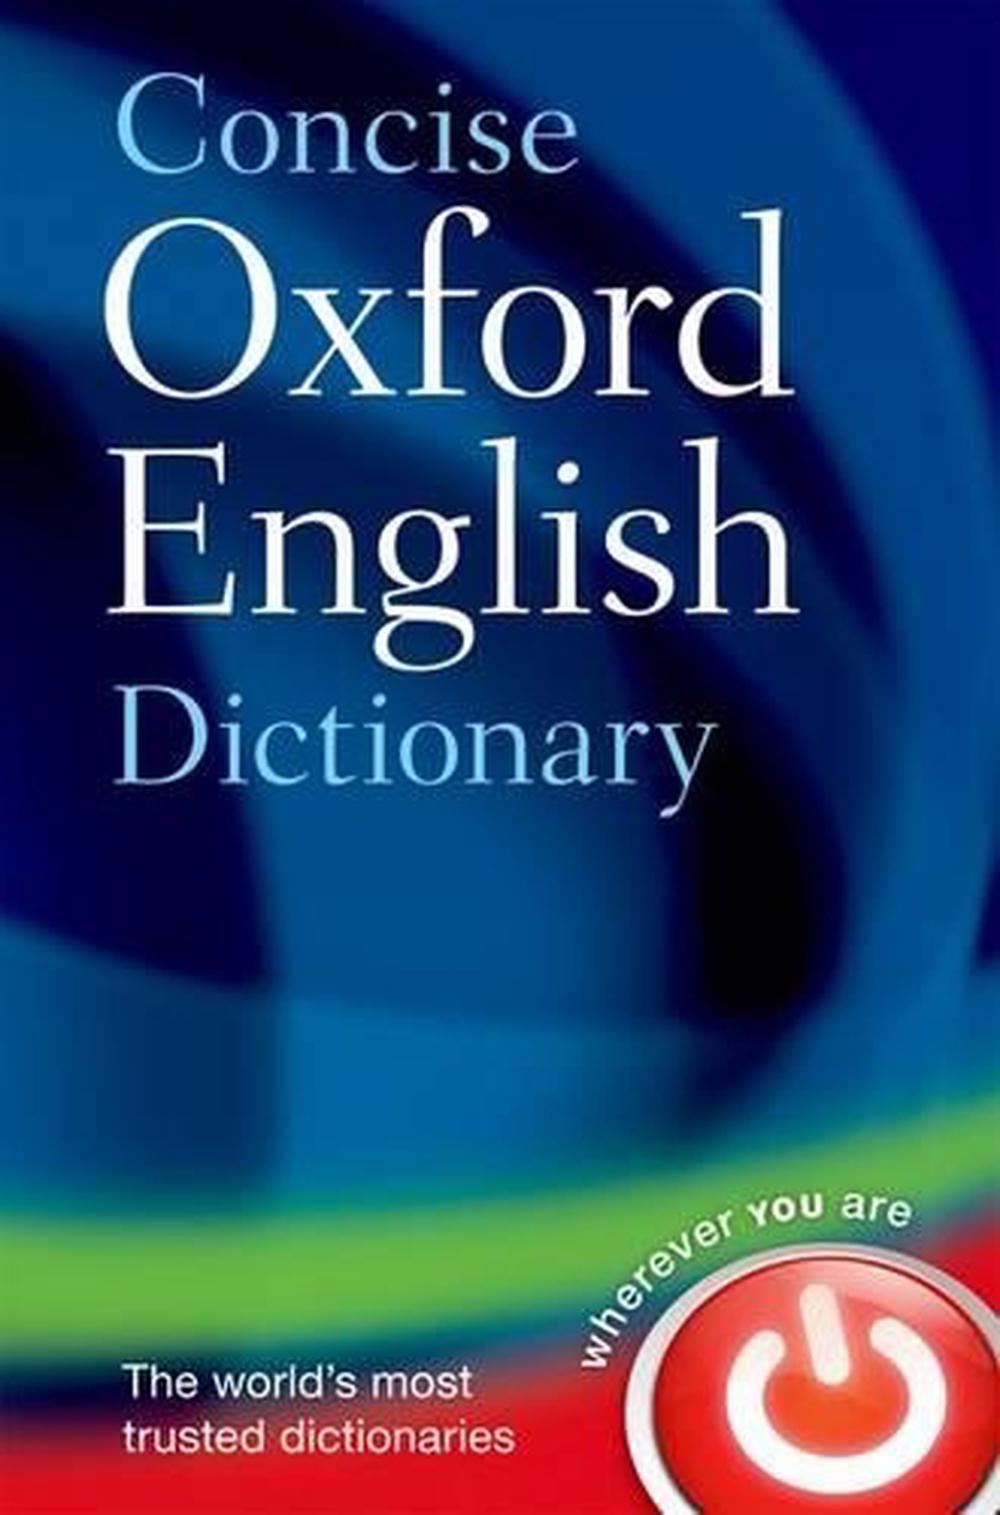 dictionaries for